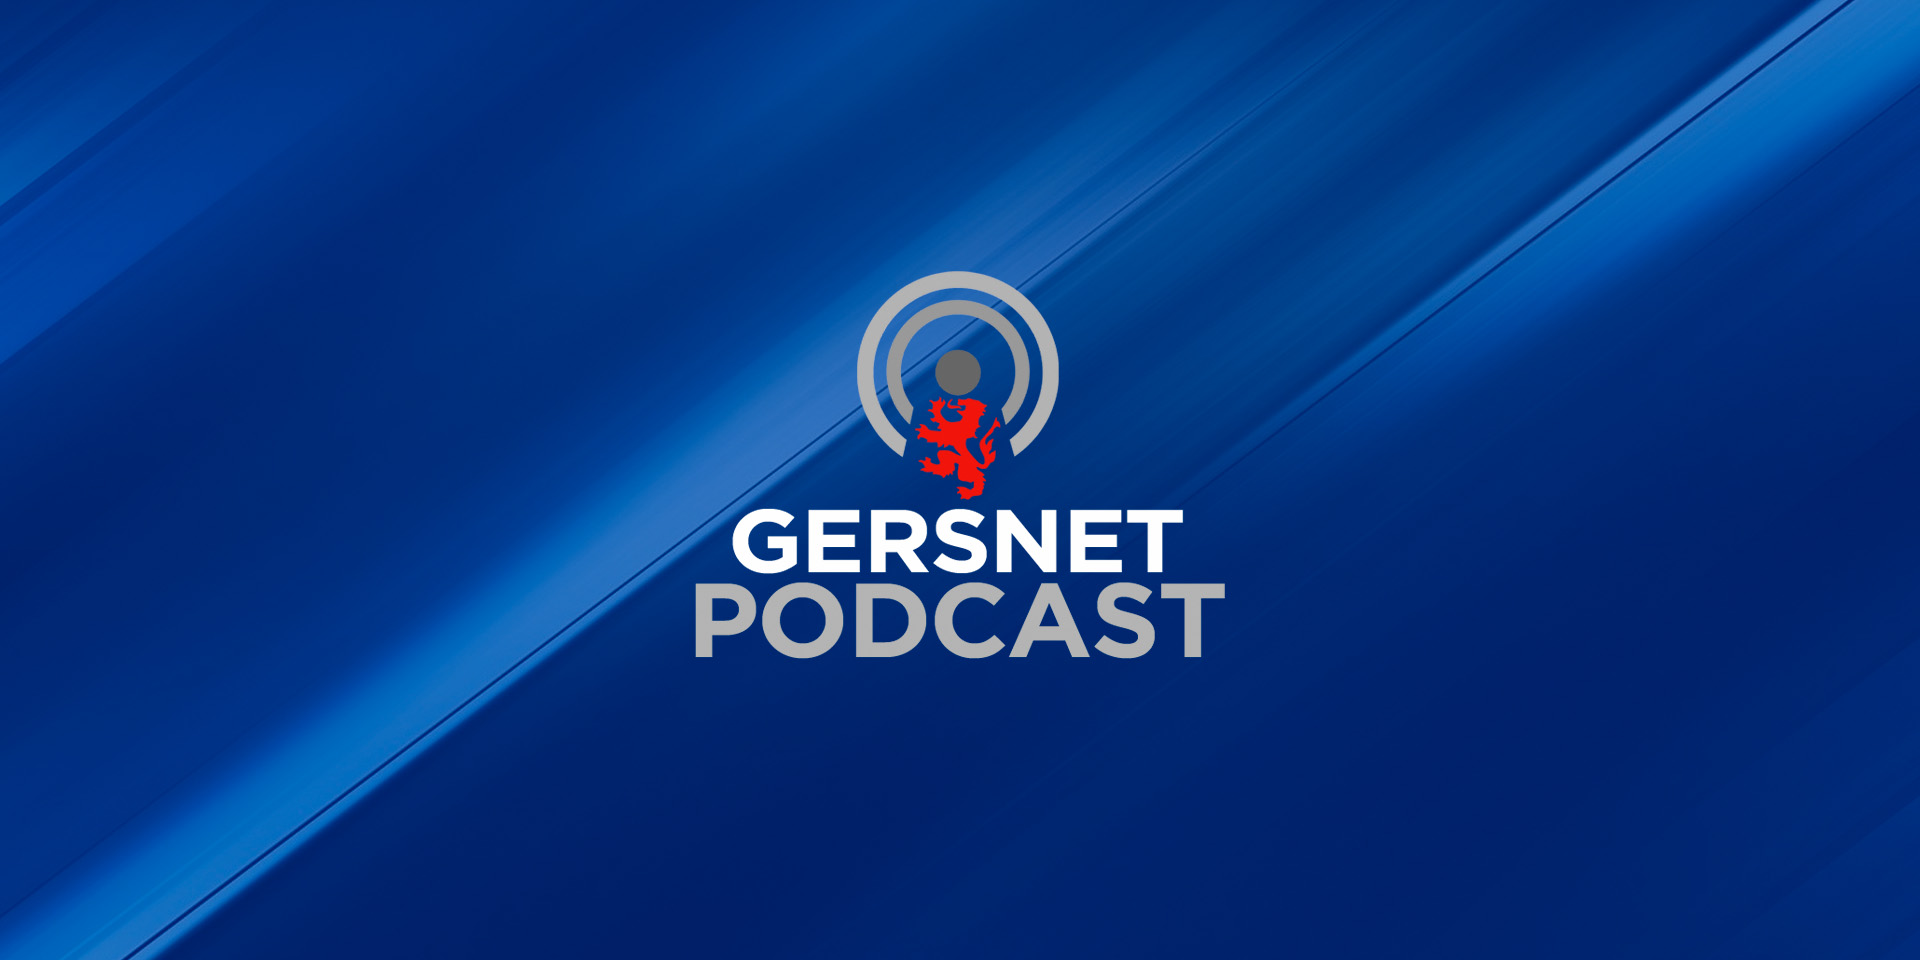 Gersnet Podcast 316 - Top of the pile in Perth